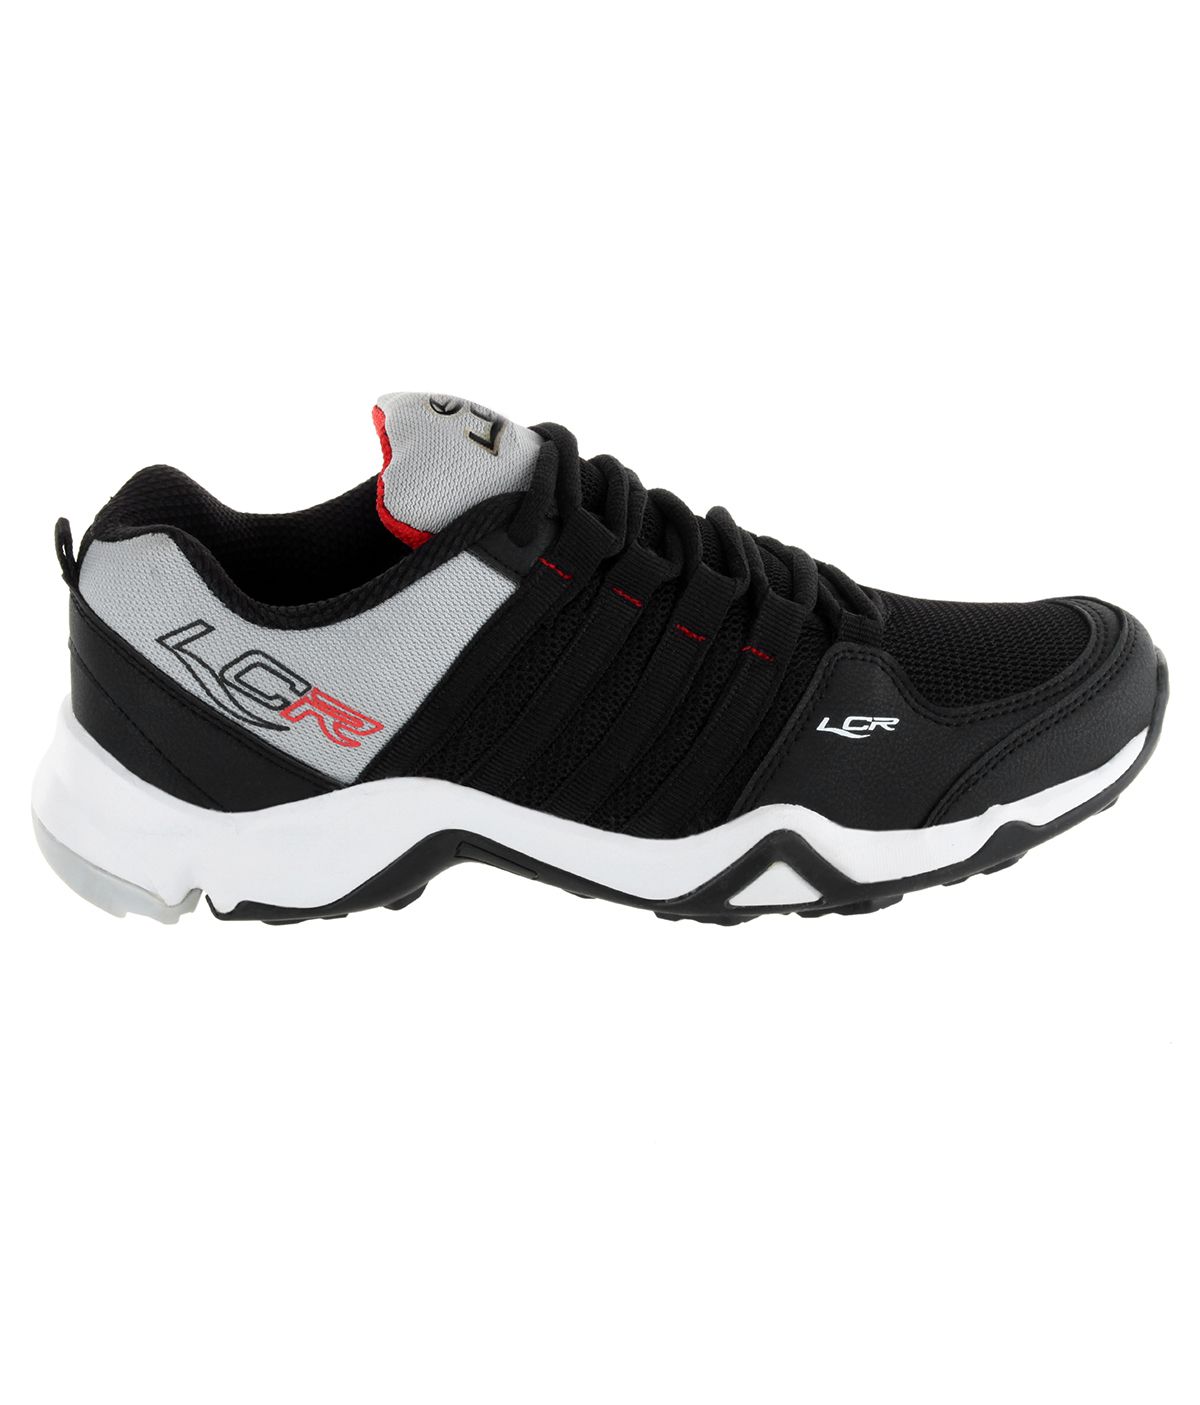 lcr sports shoes price